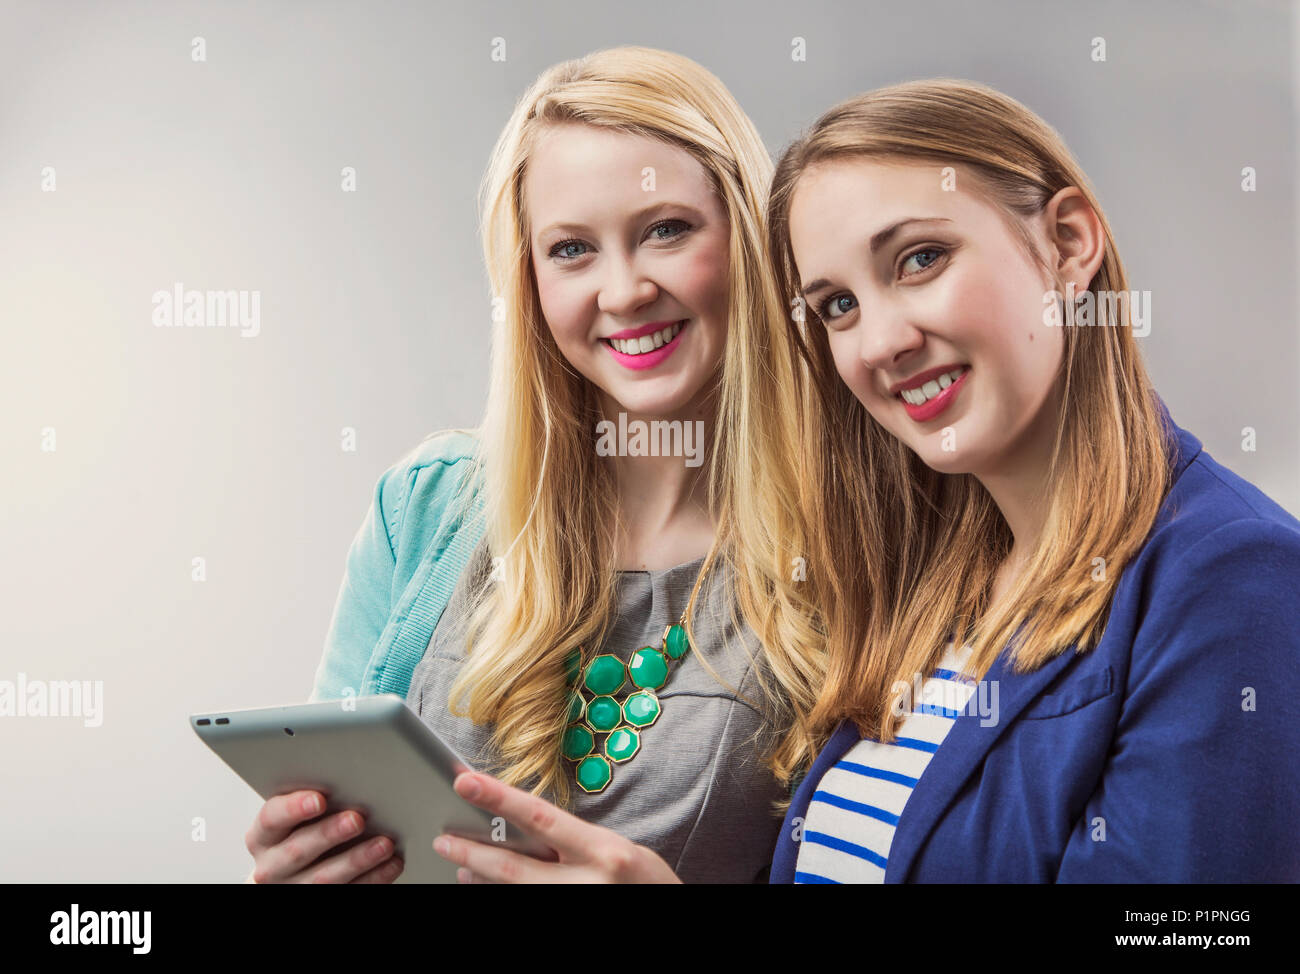 Two beautiful young women who are millennial business professionals working together using a tablet and posing for the camera at their workplace Stock Photo